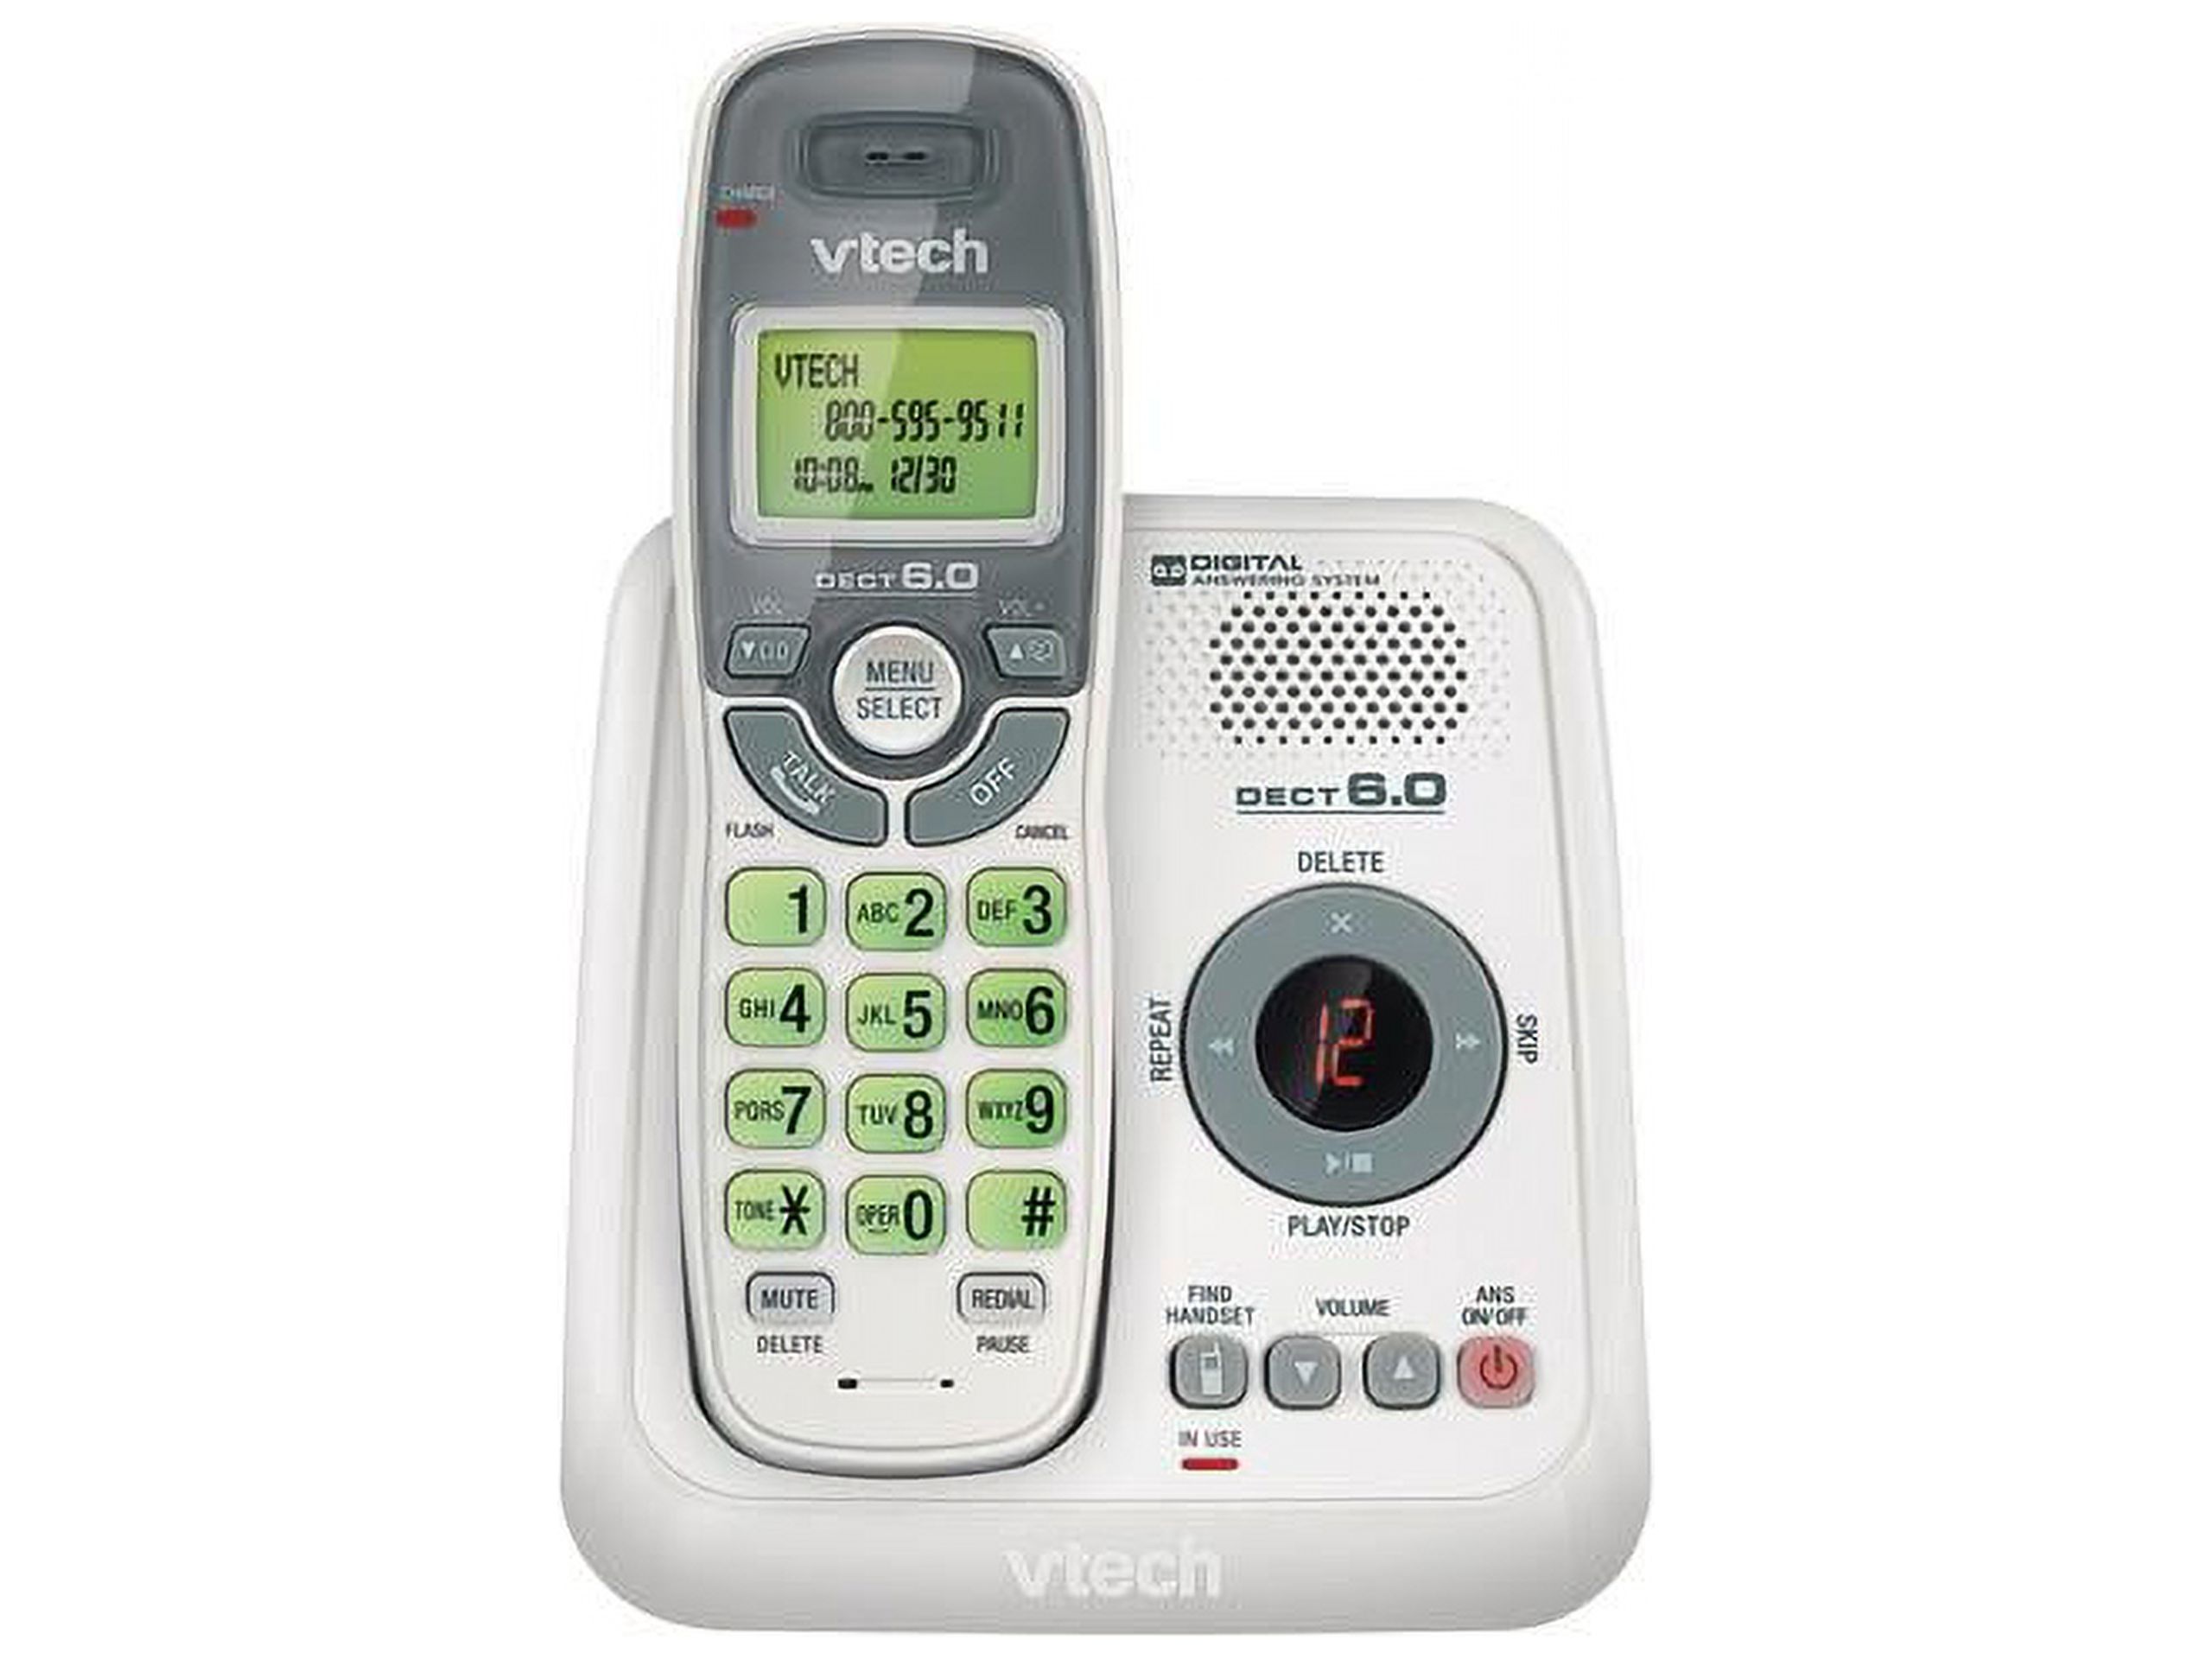 VTech CS6124 DECT 6.0 Cordless Phone with Answering System and Caller ID/Call Waiting, White - image 1 of 11